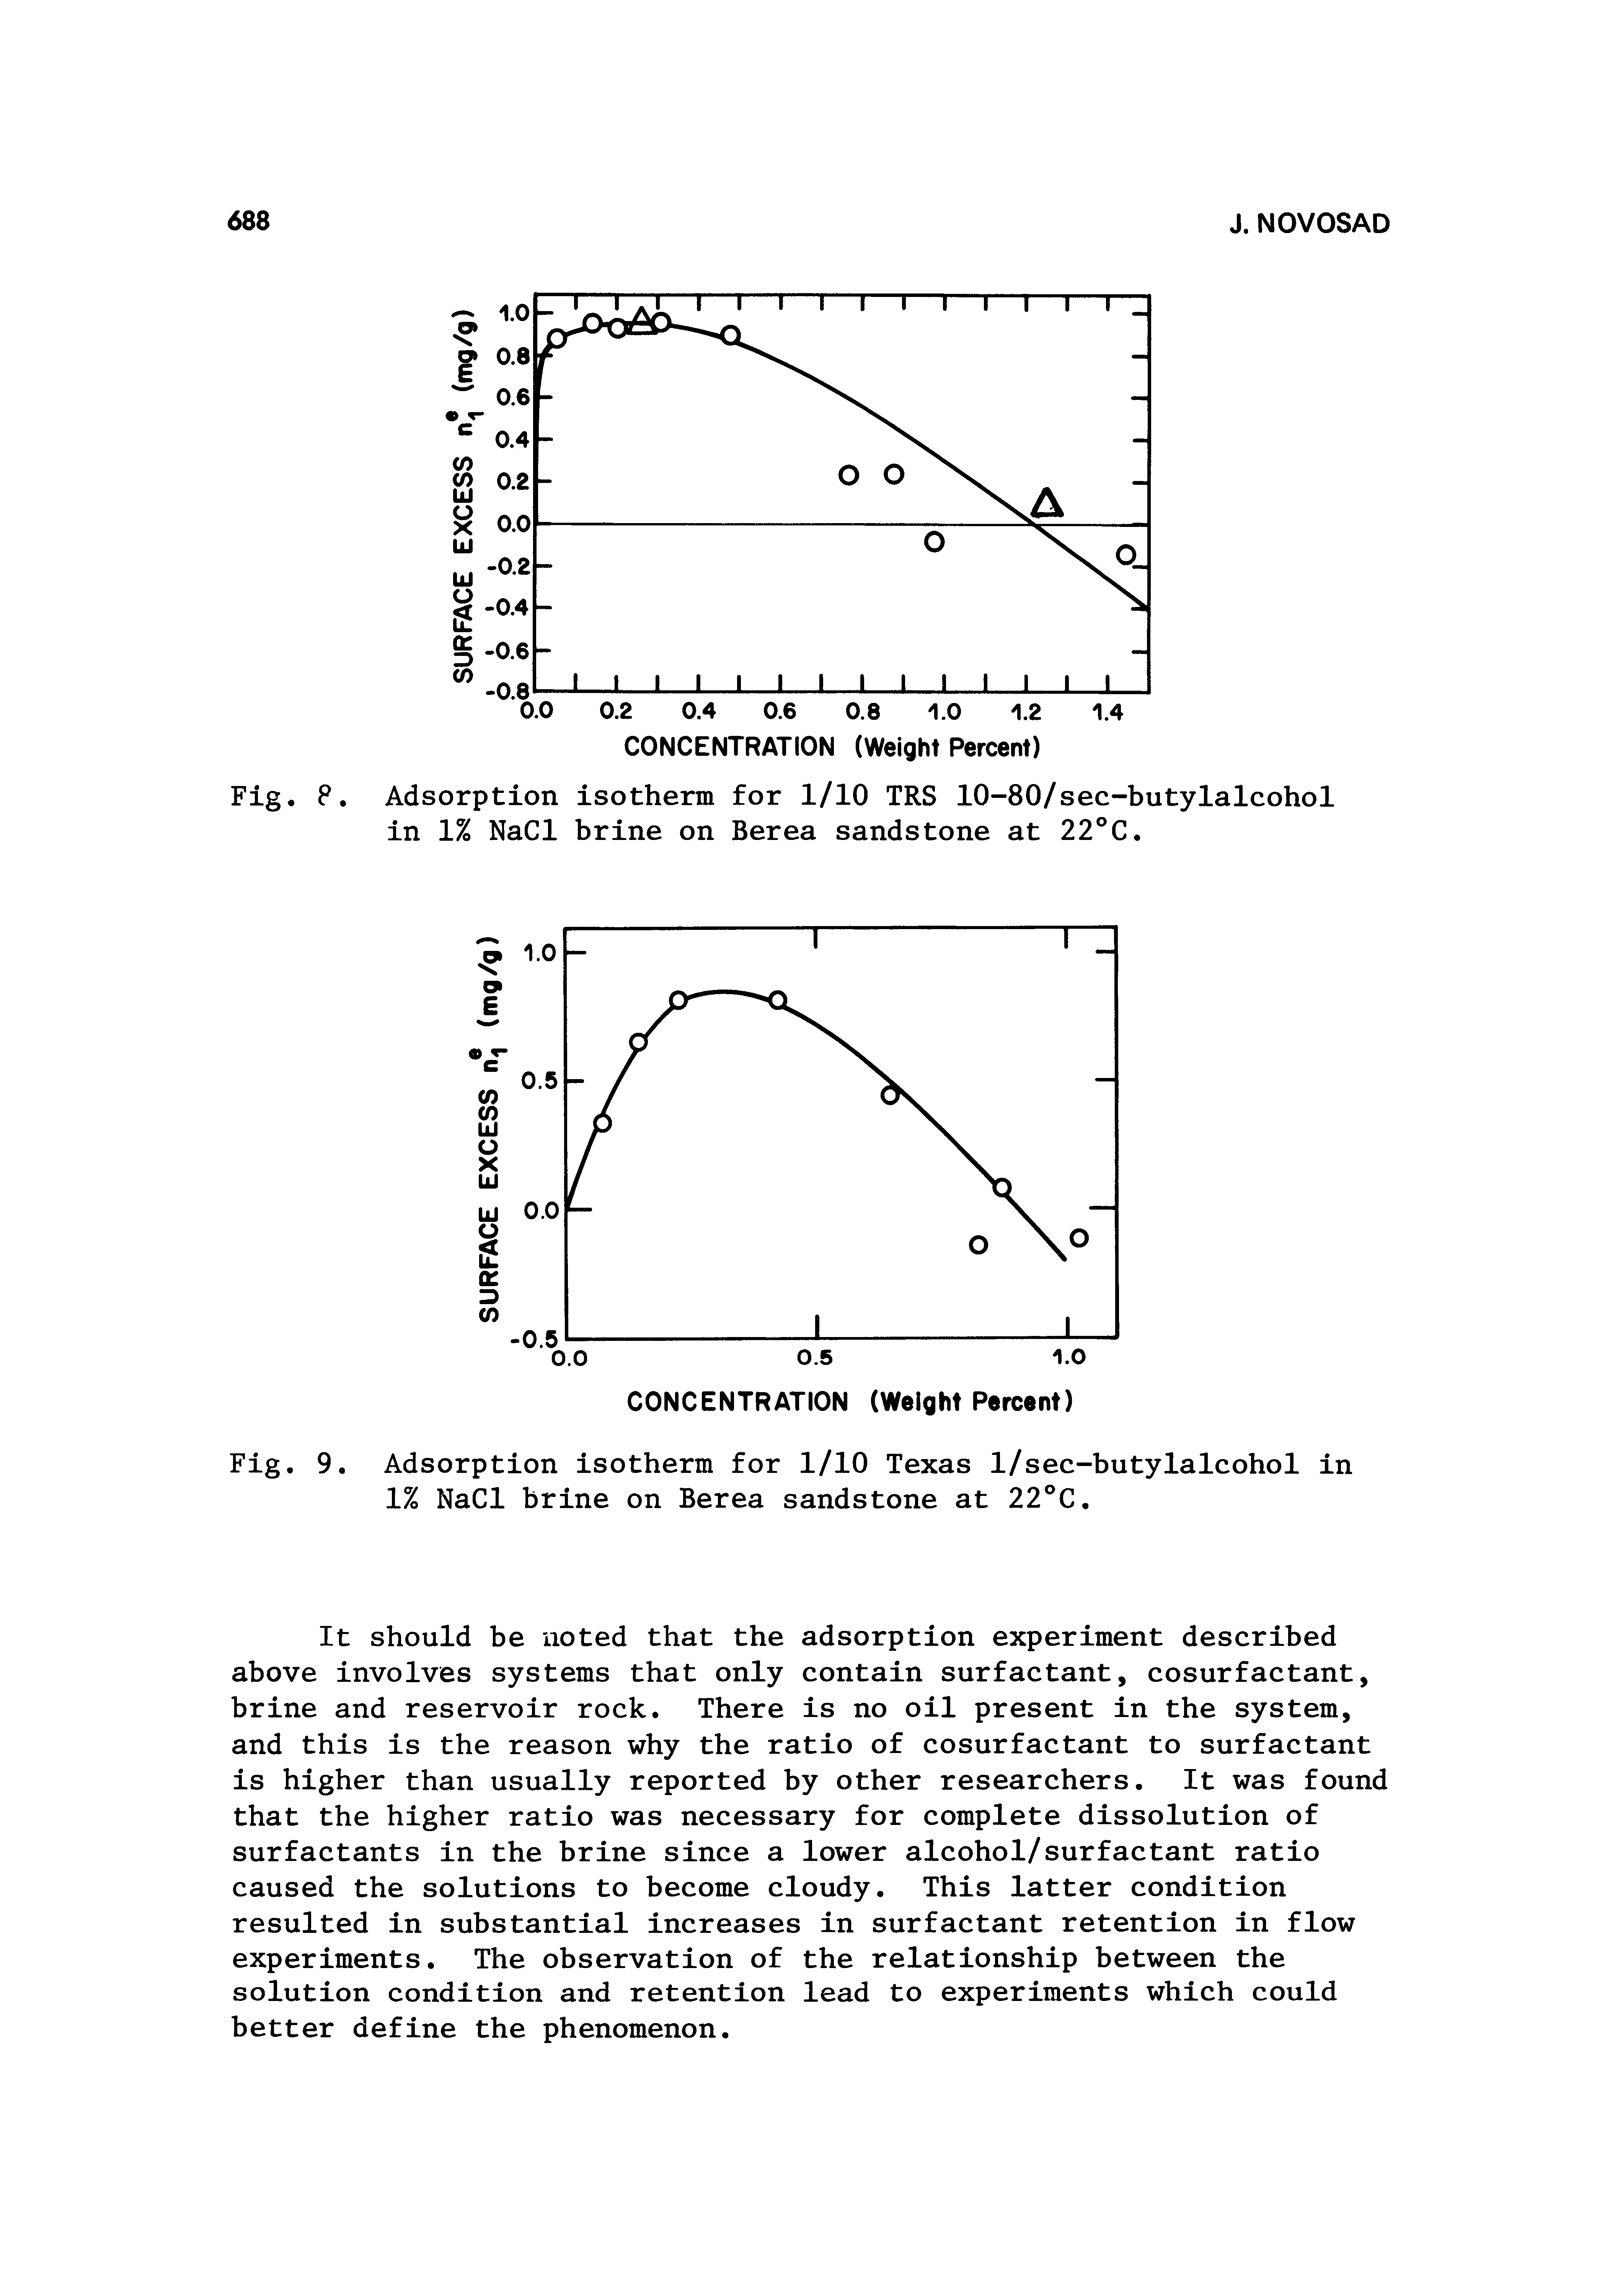 Fig. 9. Adsorption isotherm for 1/10 Texas 1/sec-butylalcohol in 1% NaCl brine on Berea sandstone at 22°C.